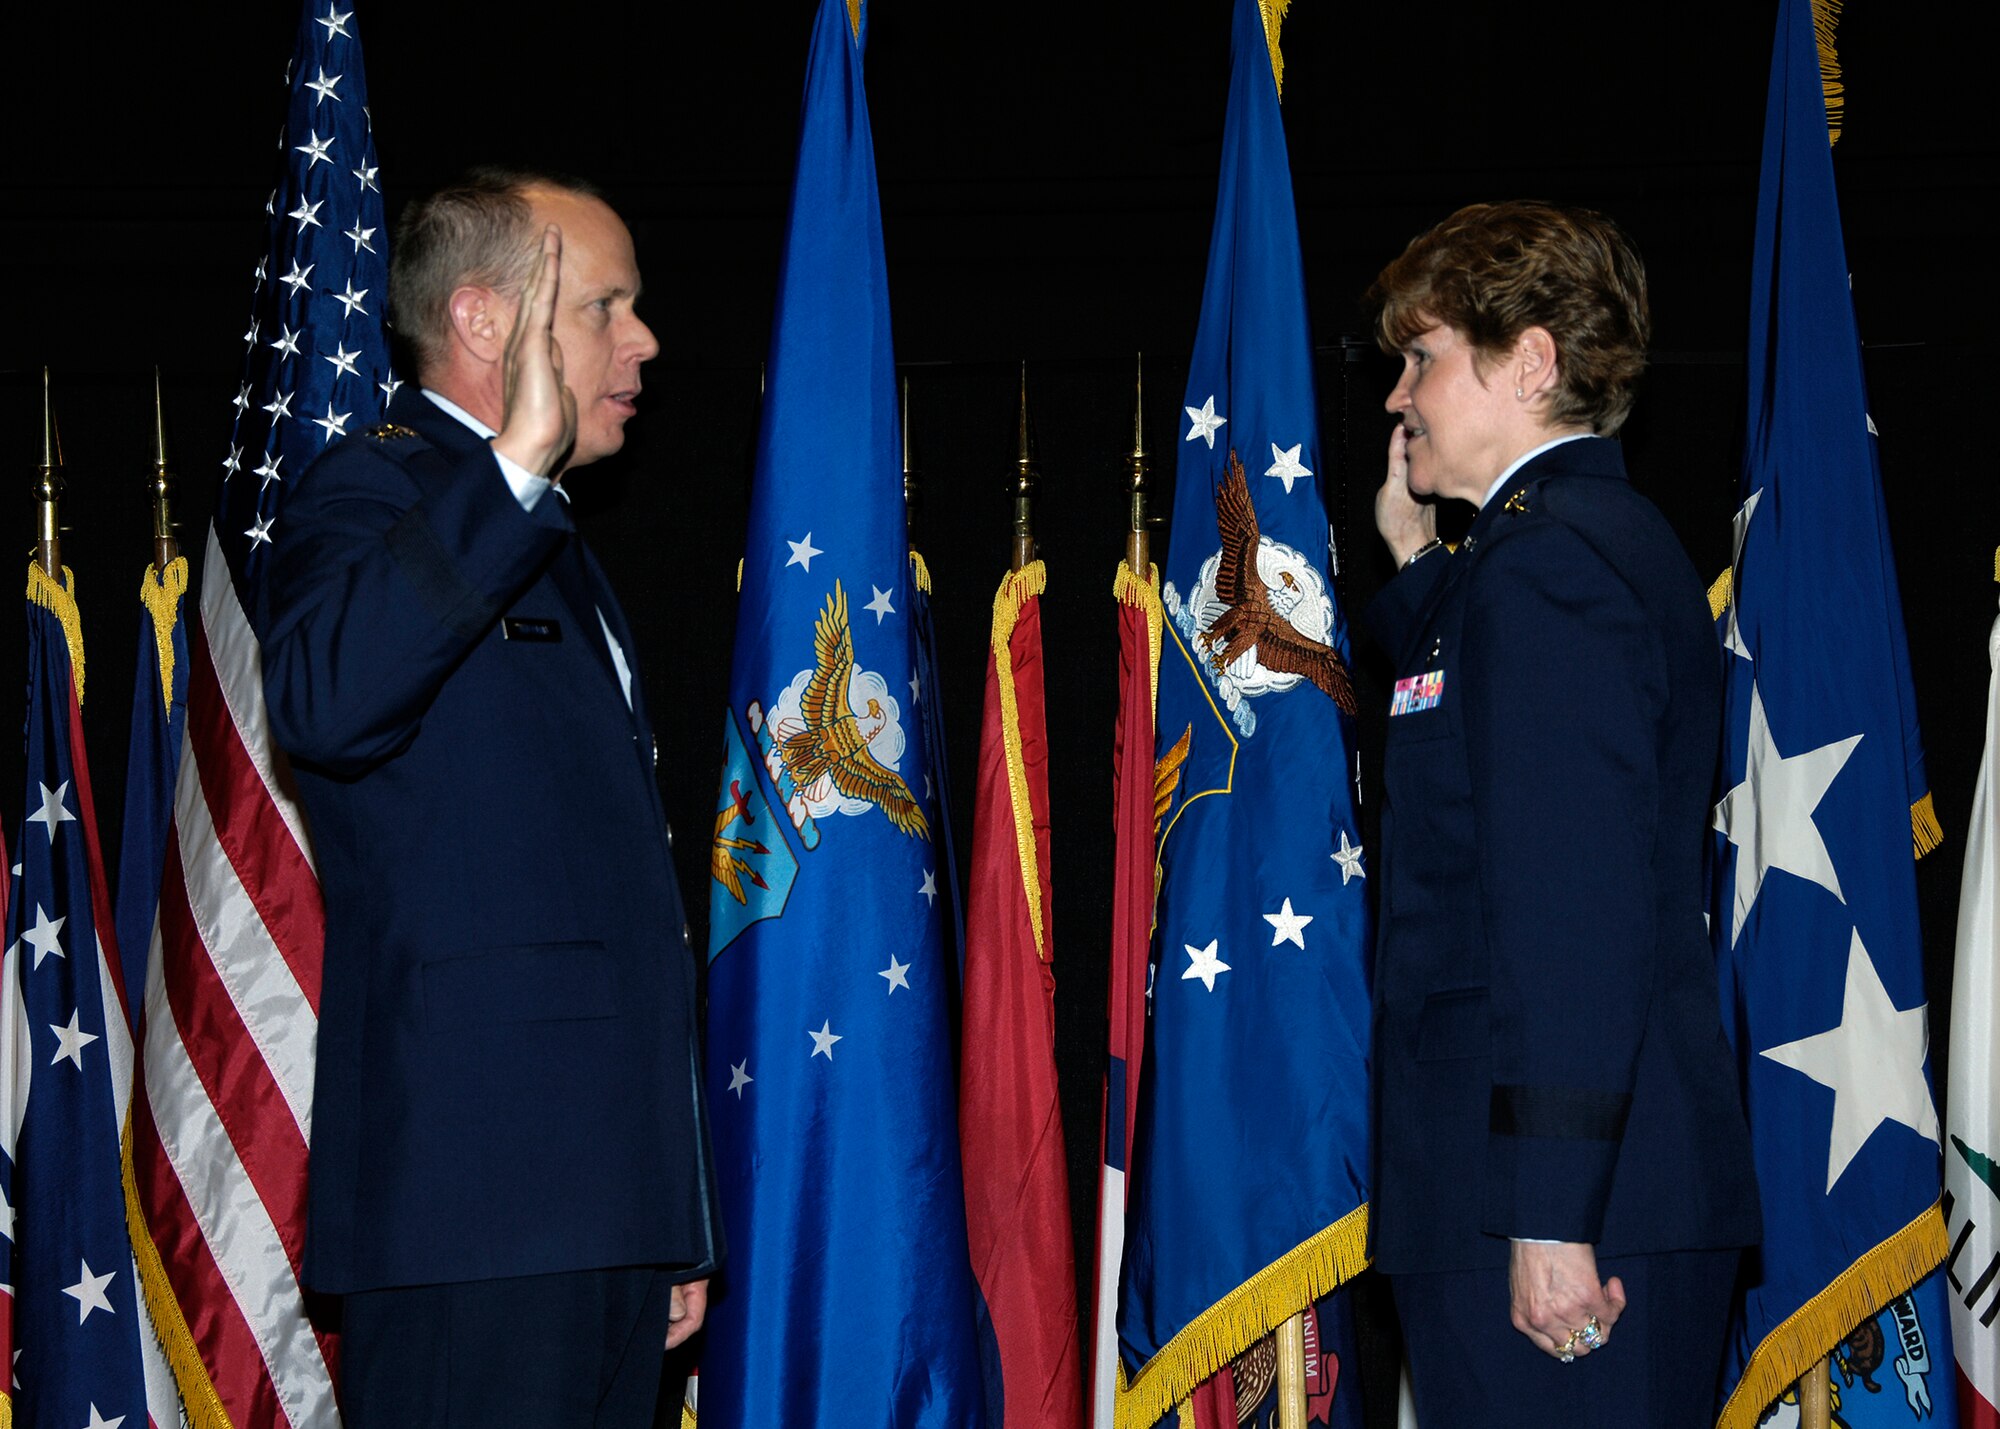 Gen. Donald J. Hoffman, commander of Air Force Materiel Command, re-administers the oath of office to Lt. Gen. Janet C. Wolfenbarger during a Dec. 30 promotion ceremony at the National Museum of the United States Air Force.  General Wolfenbarger's new three-star rank and position as the Vice Commander of AFMC were confirmed by the U.S. Senate Dec. 4.  (U.S. Air Force Photo/Mike Libecap)